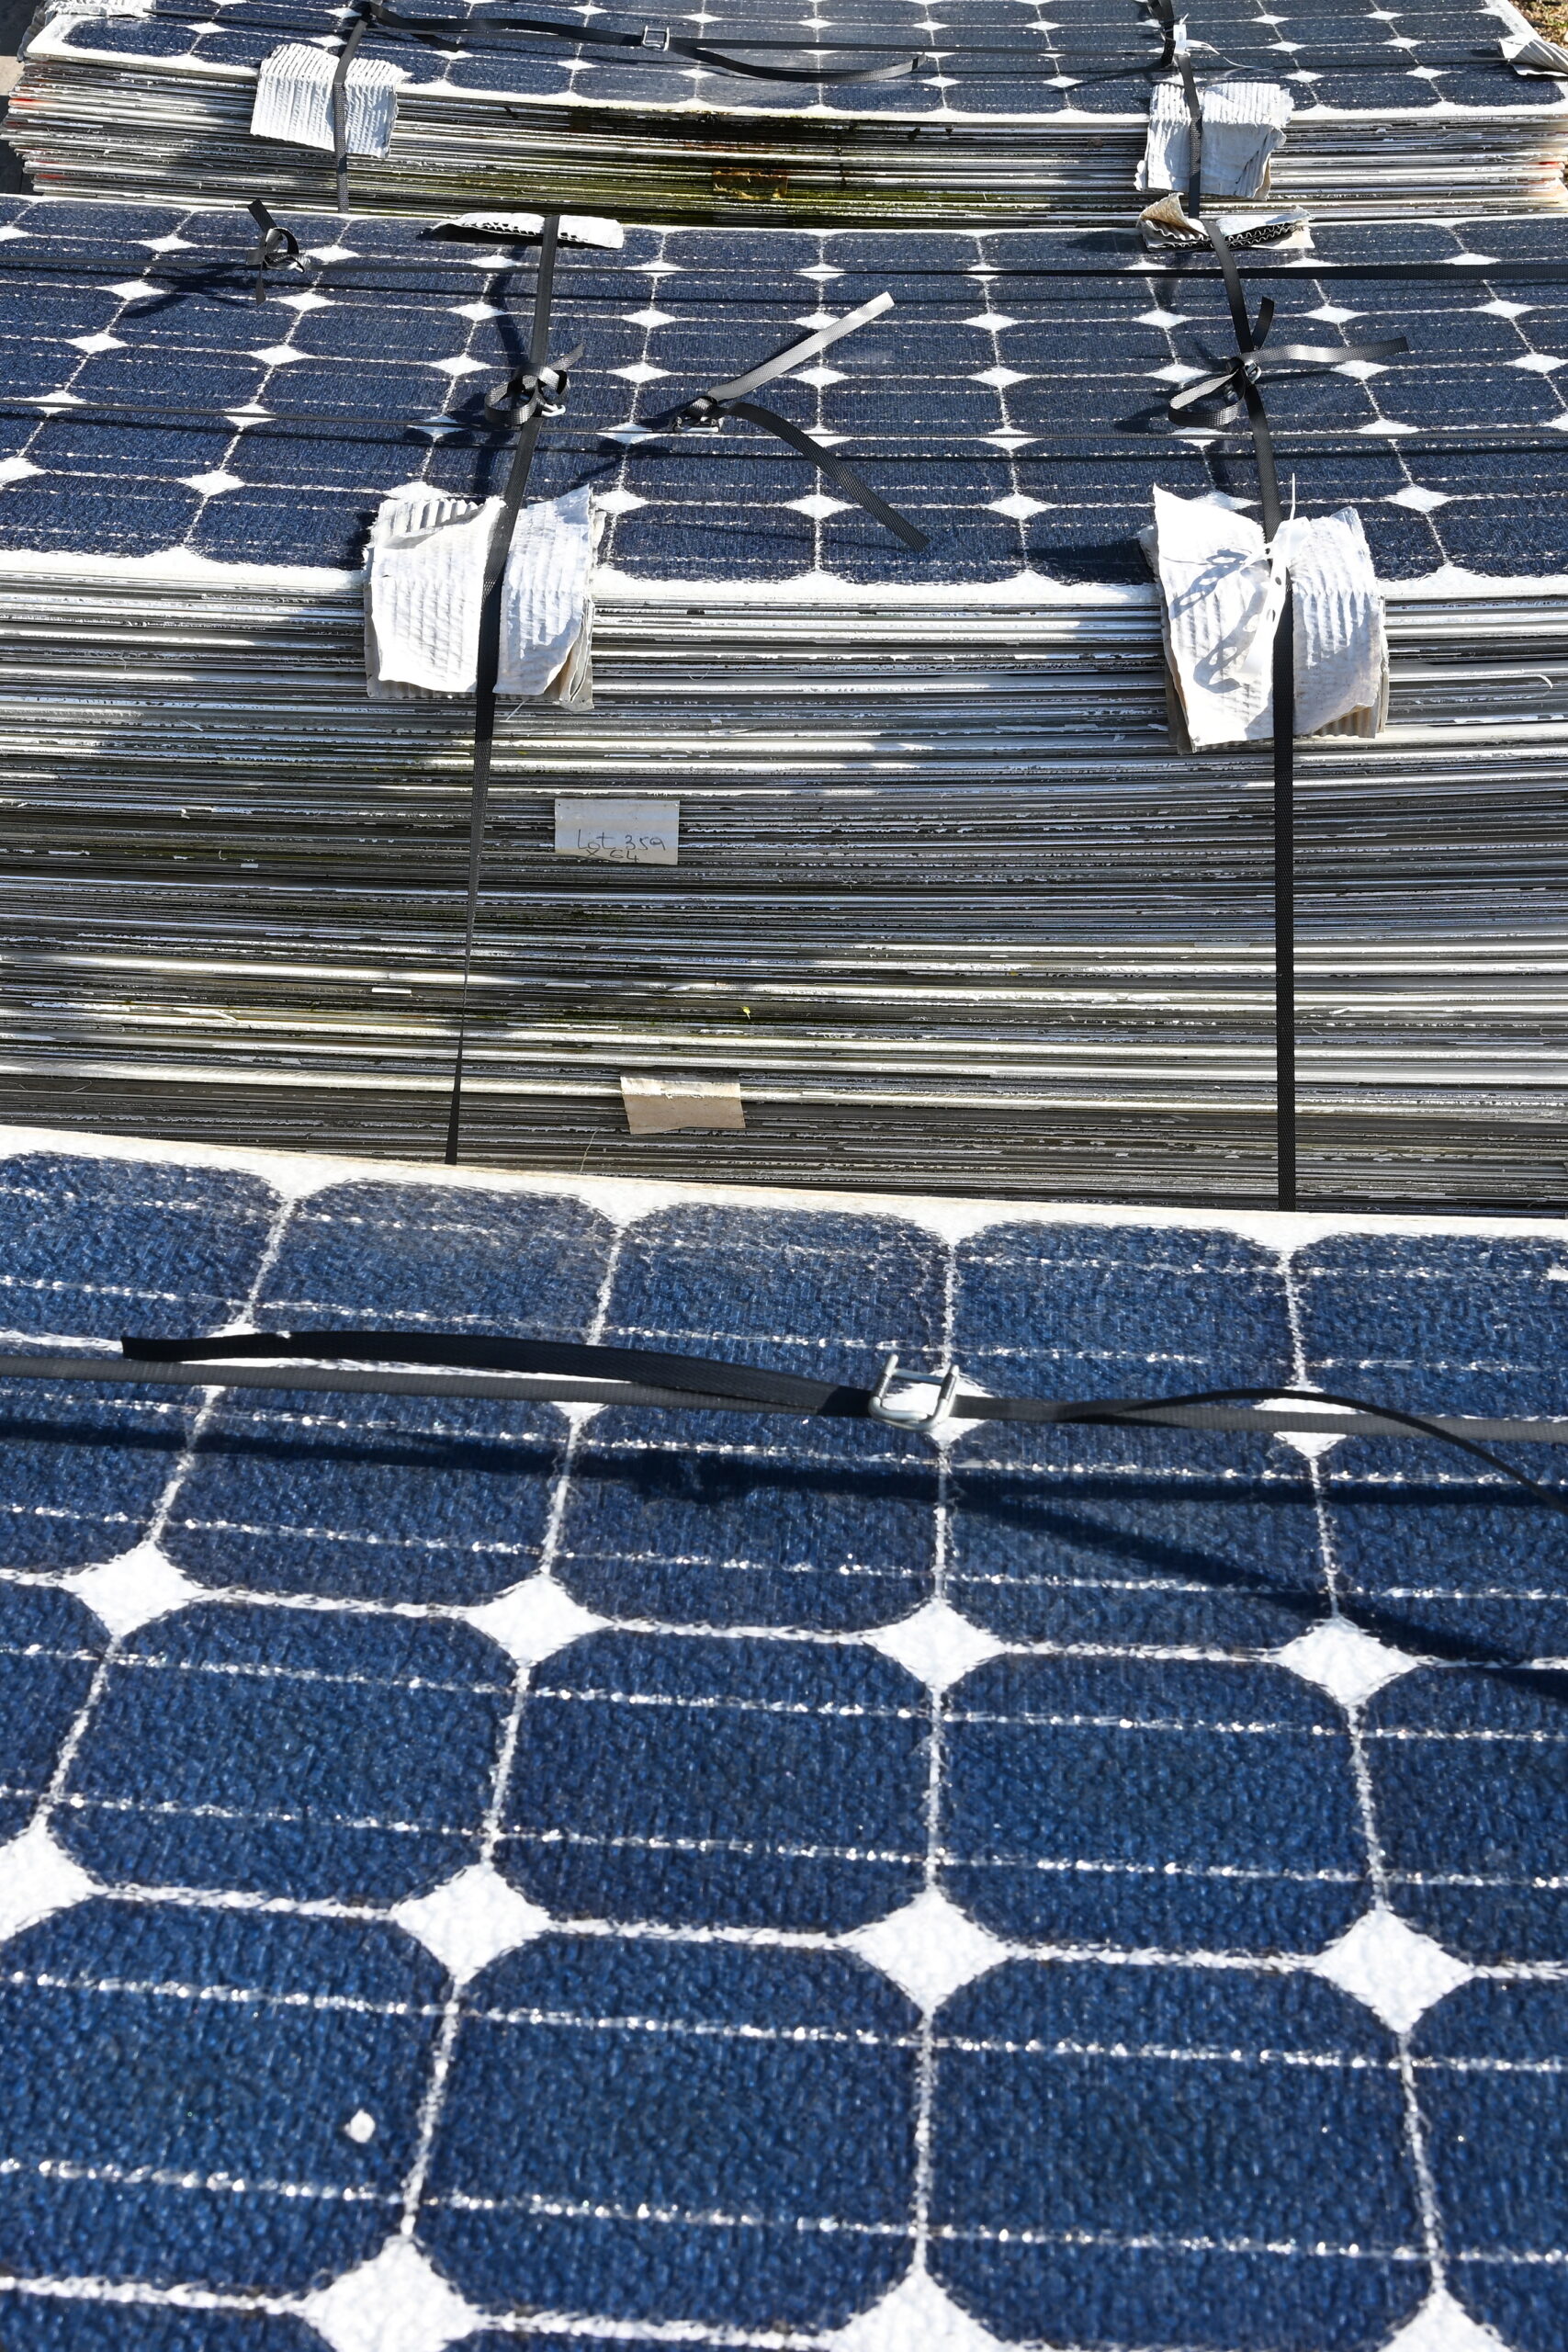 French energy minister visits solar panel recycling plant